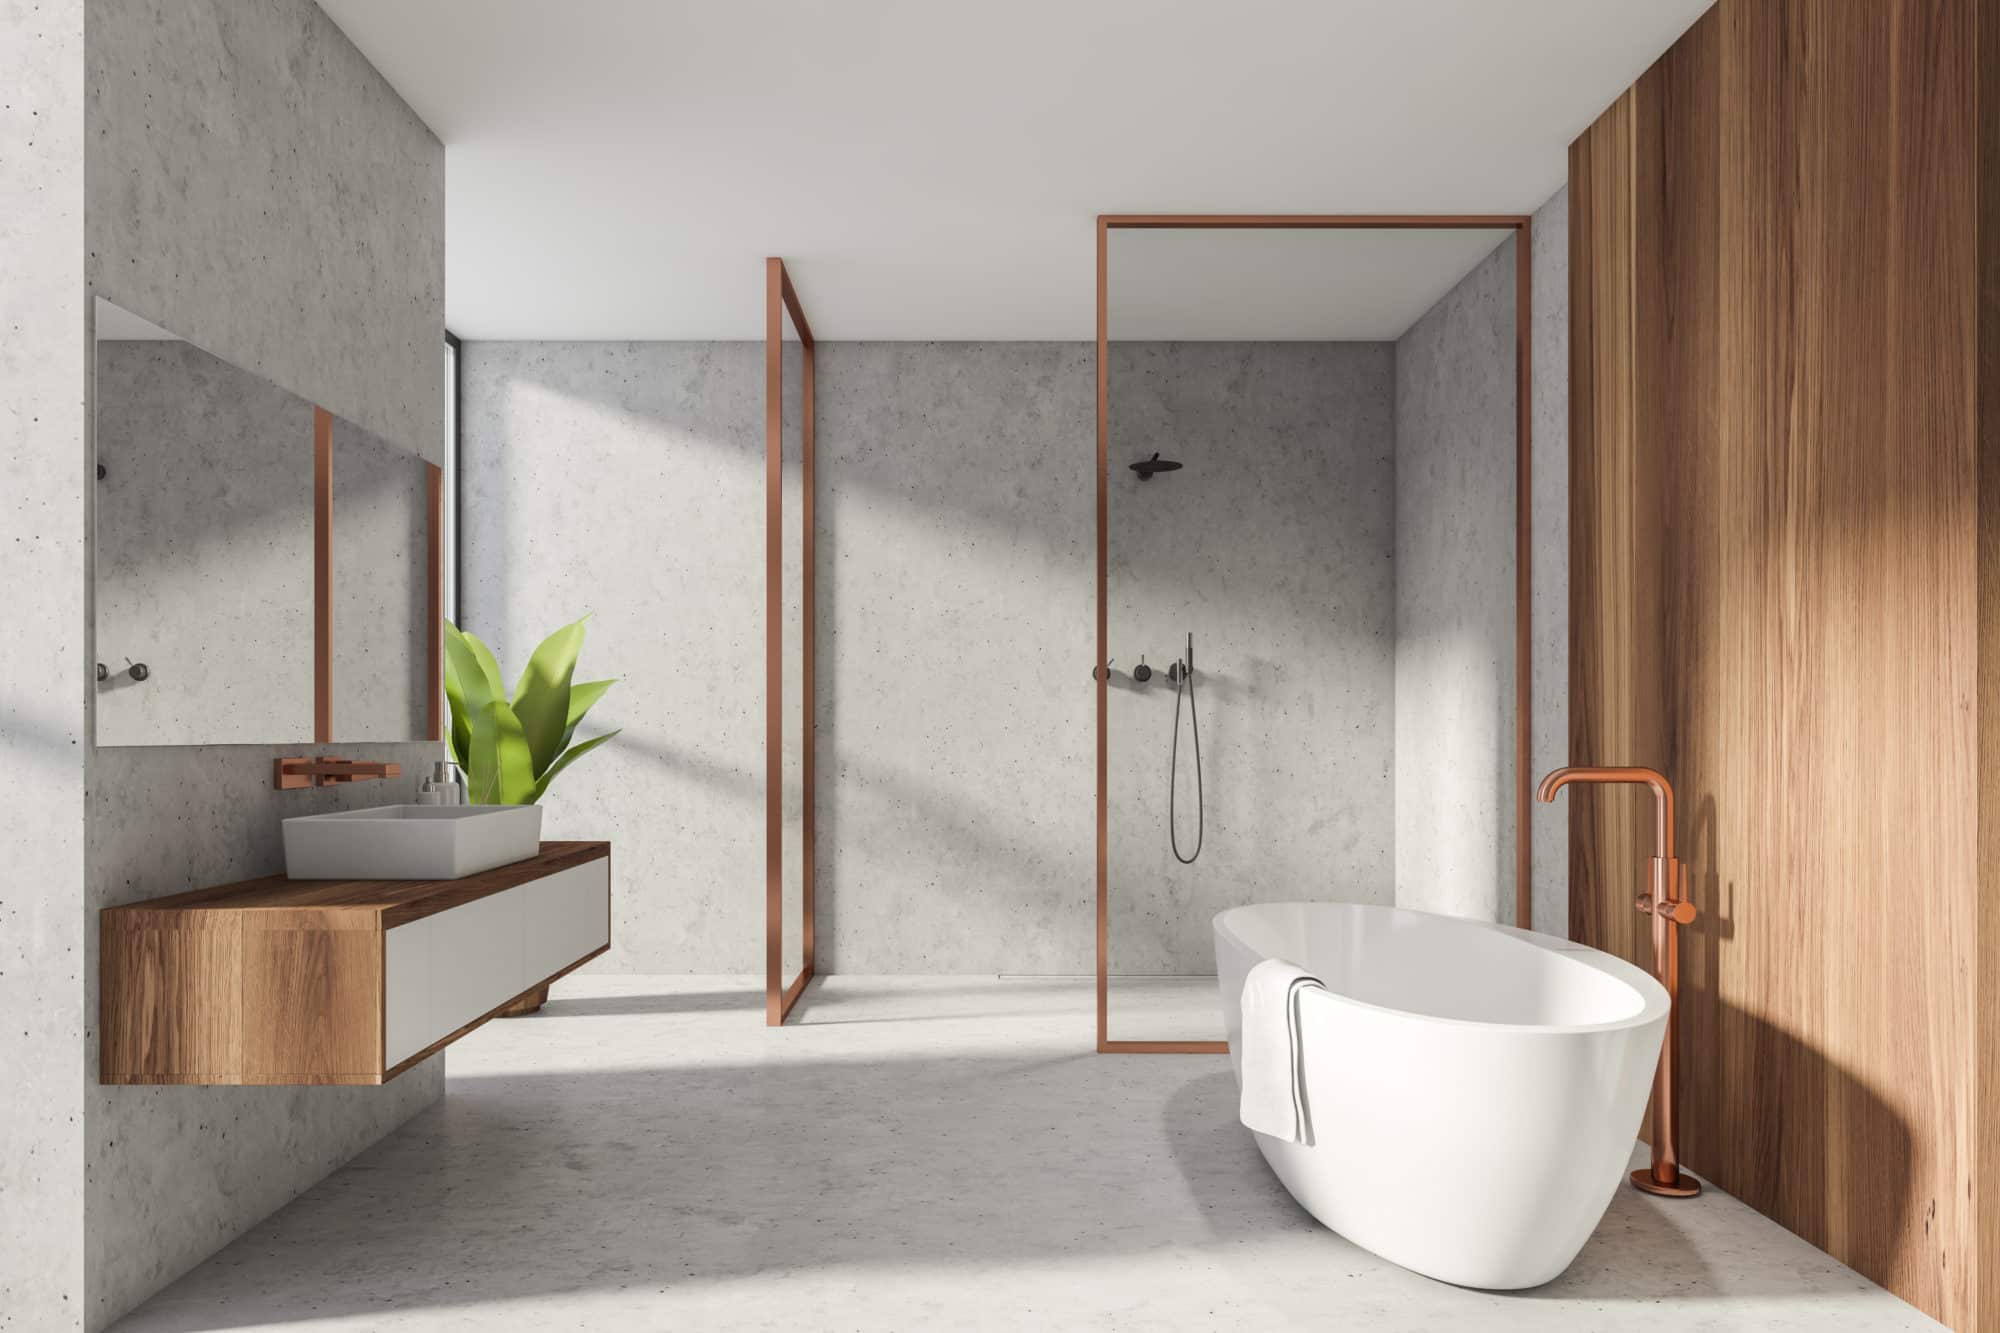 3D rendering of a modern bathroom with a bathtub and wooden shower walls.